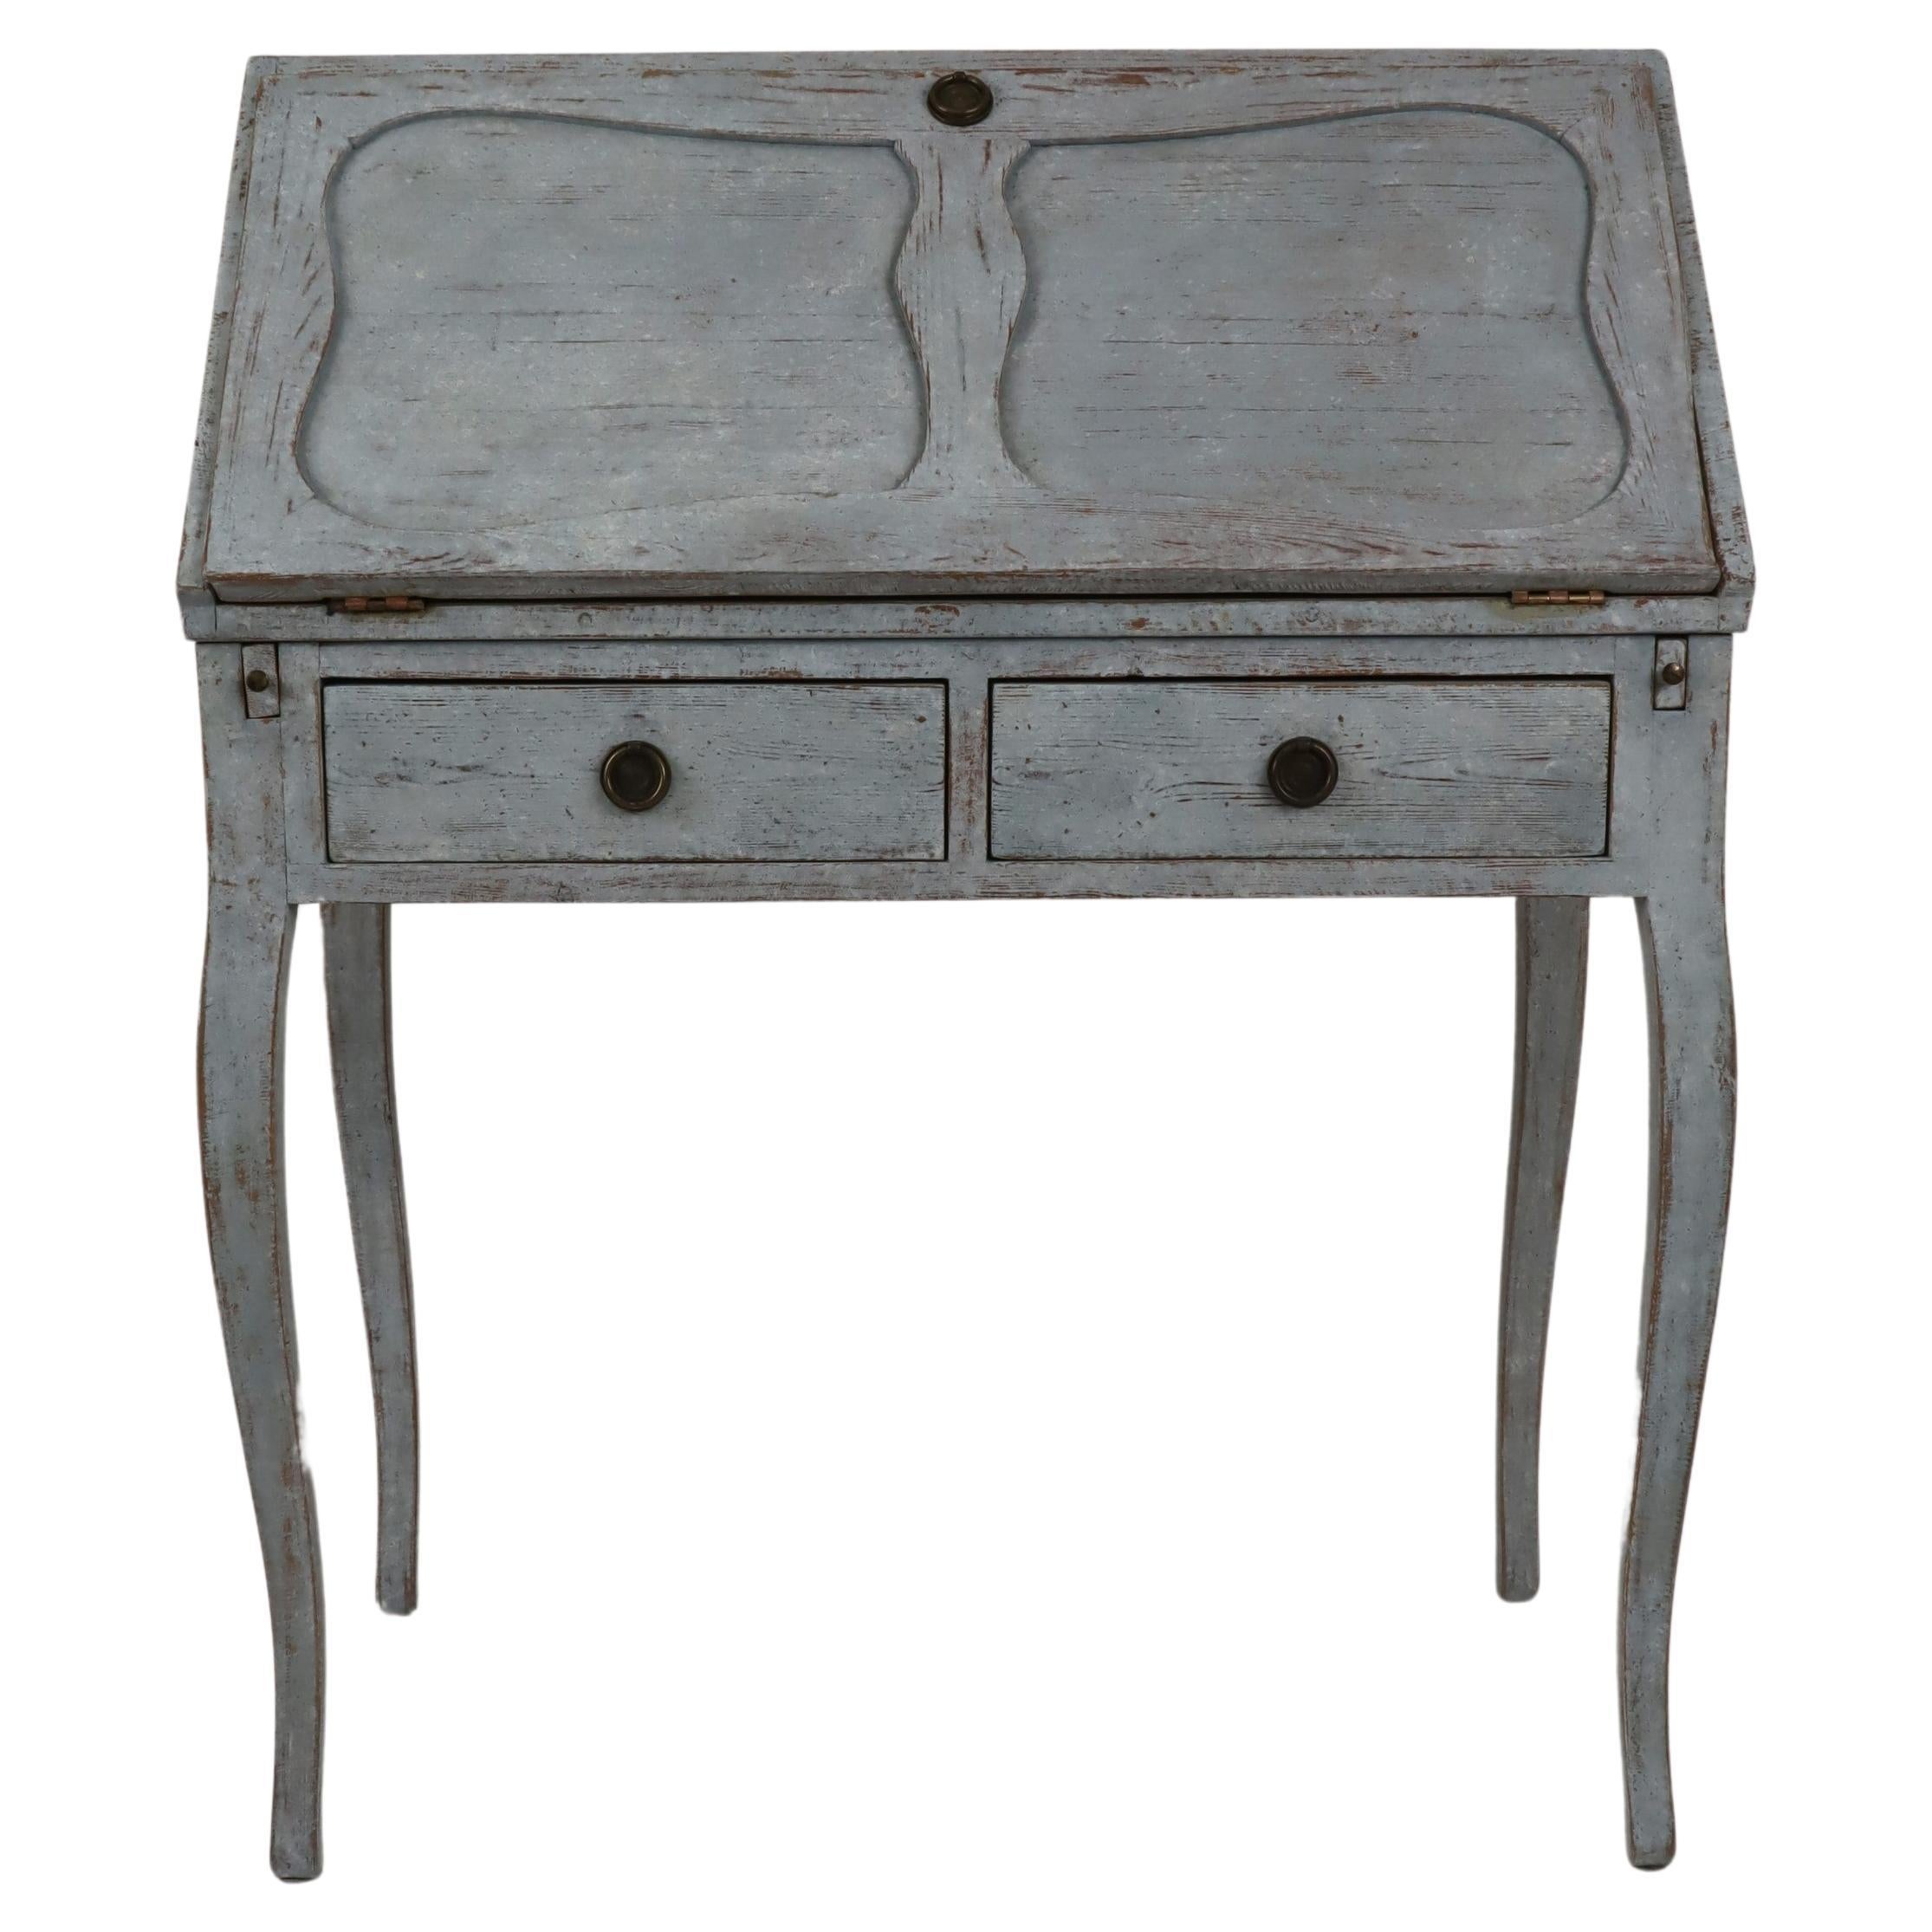 Swedish 1880s Blue Gray Painted Slant Front Desk with Carved Panels and Drawers